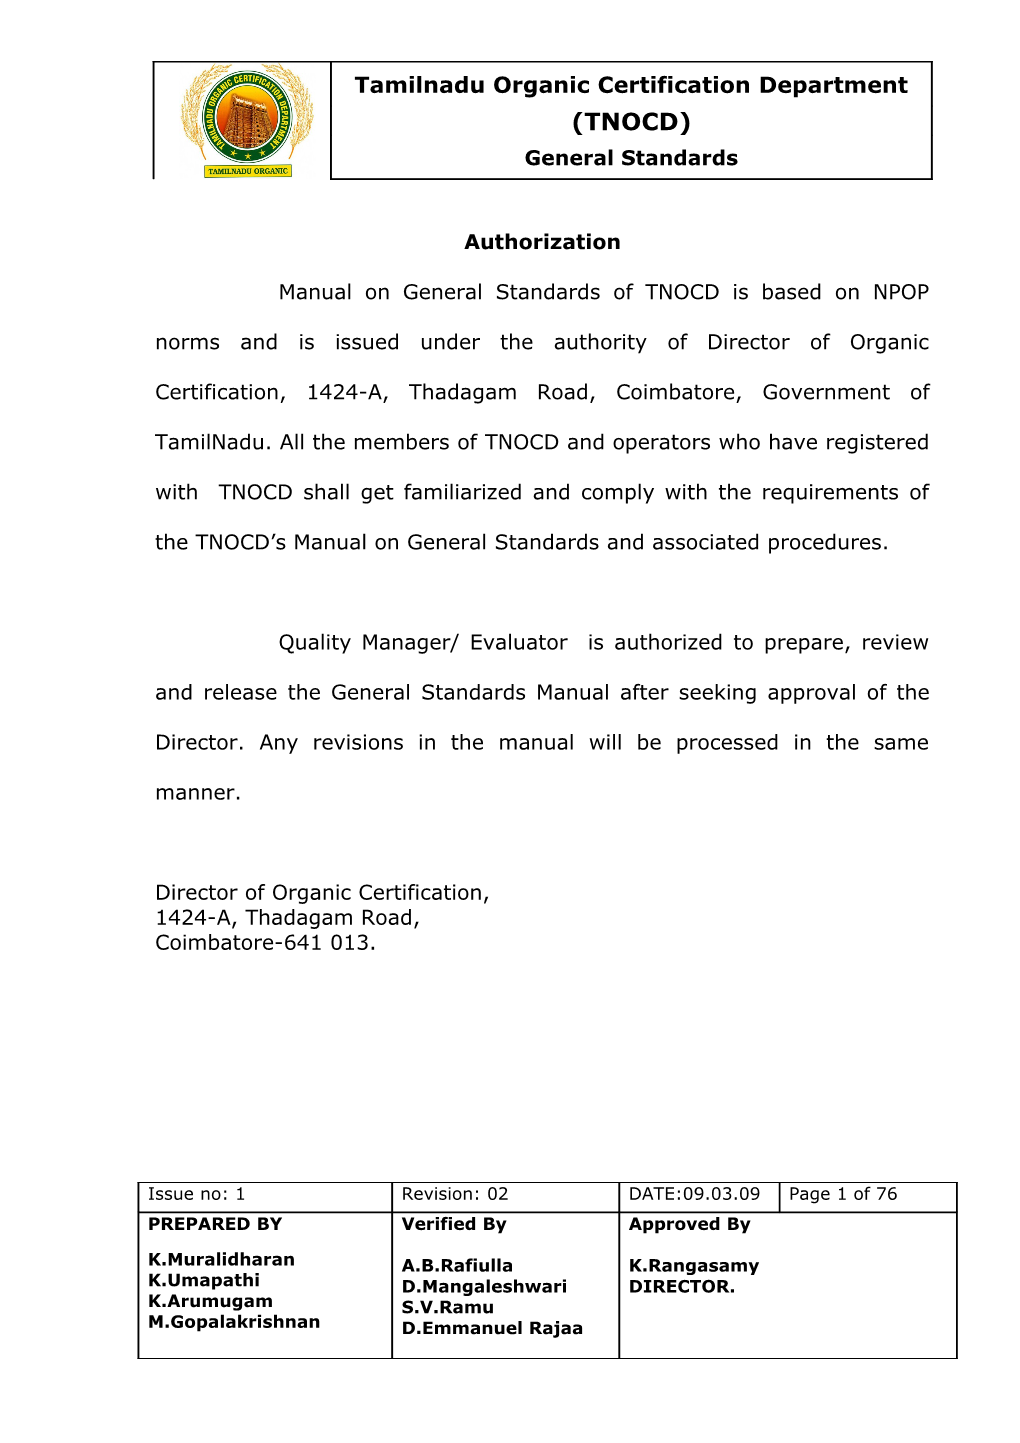 Manual on General Standards of TNOCD Is Based on NPOP Norms and Is Issued Under the Authority